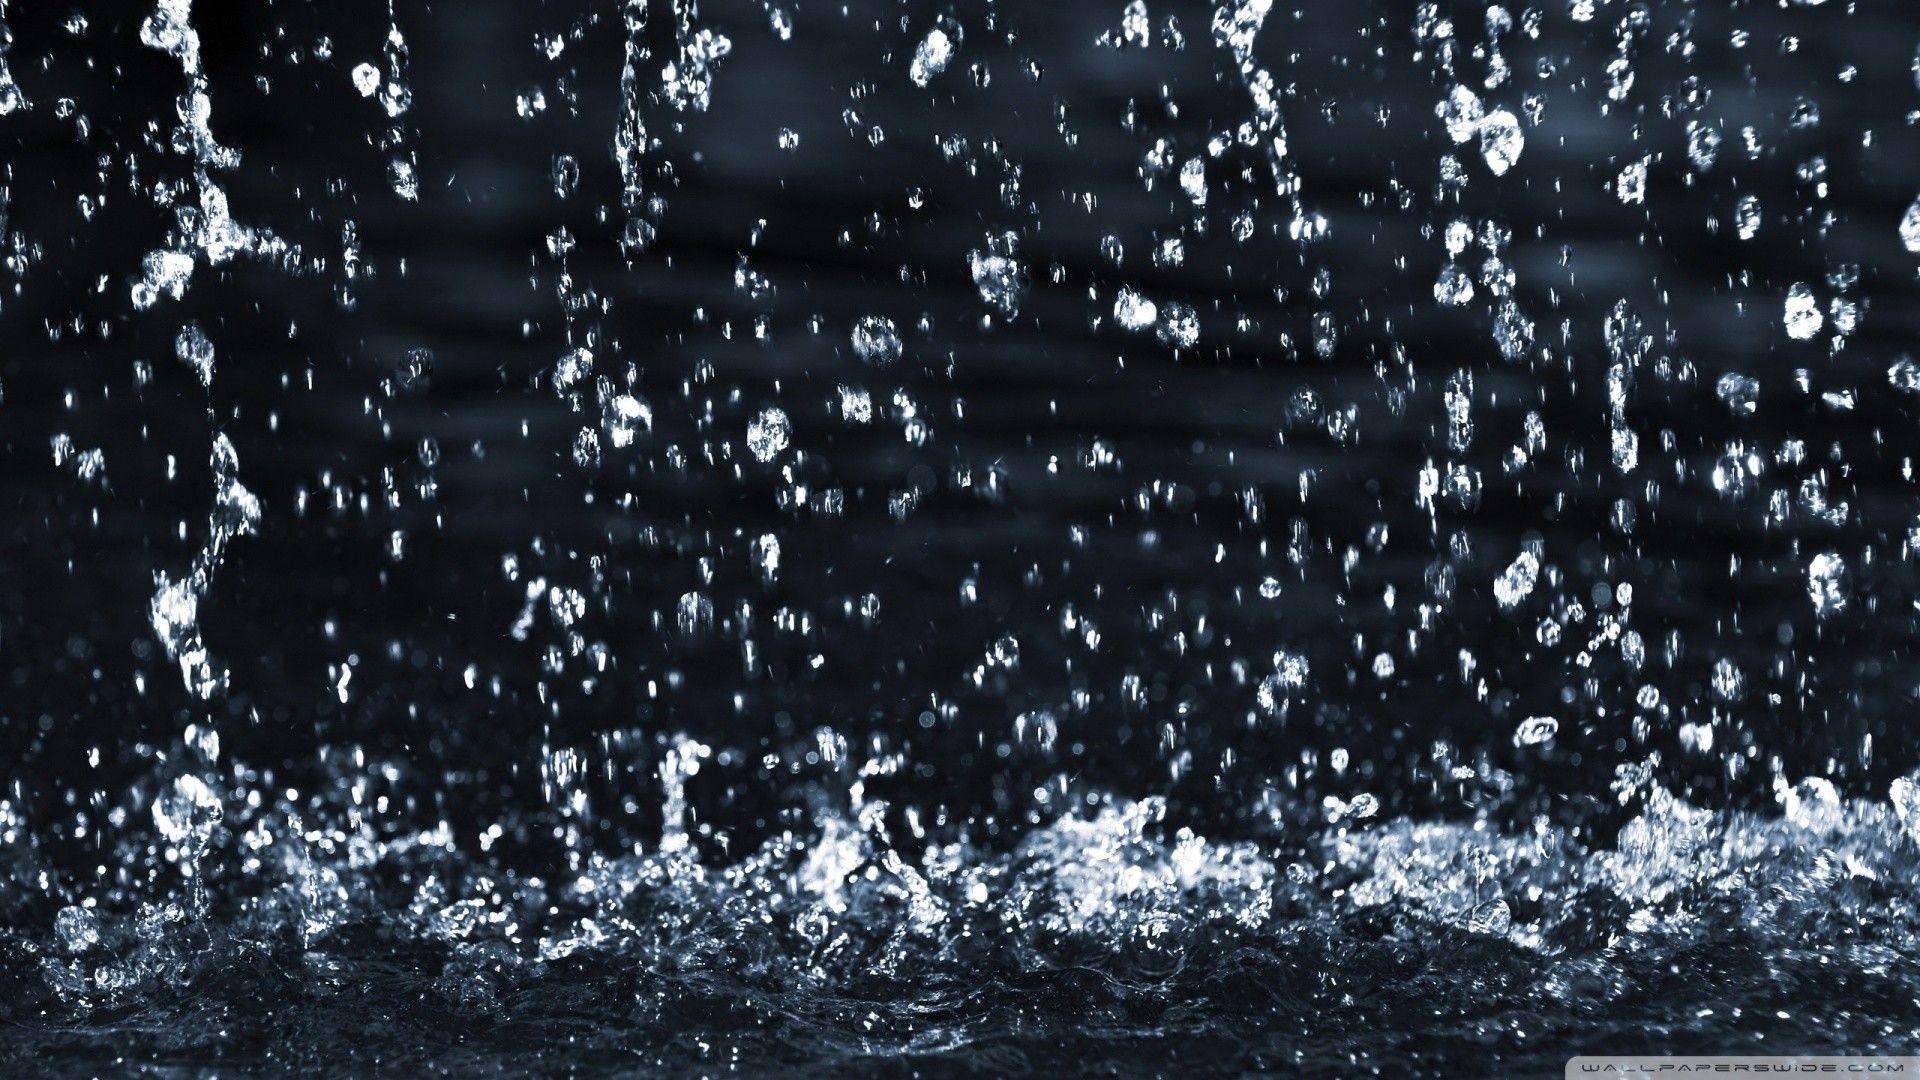 Live Rain Wallpapers Top Free Live Rain Backgrounds Wallpaperaccess In fact, you can decide to use a dark colour, and life will move on as usual. live rain wallpapers top free live